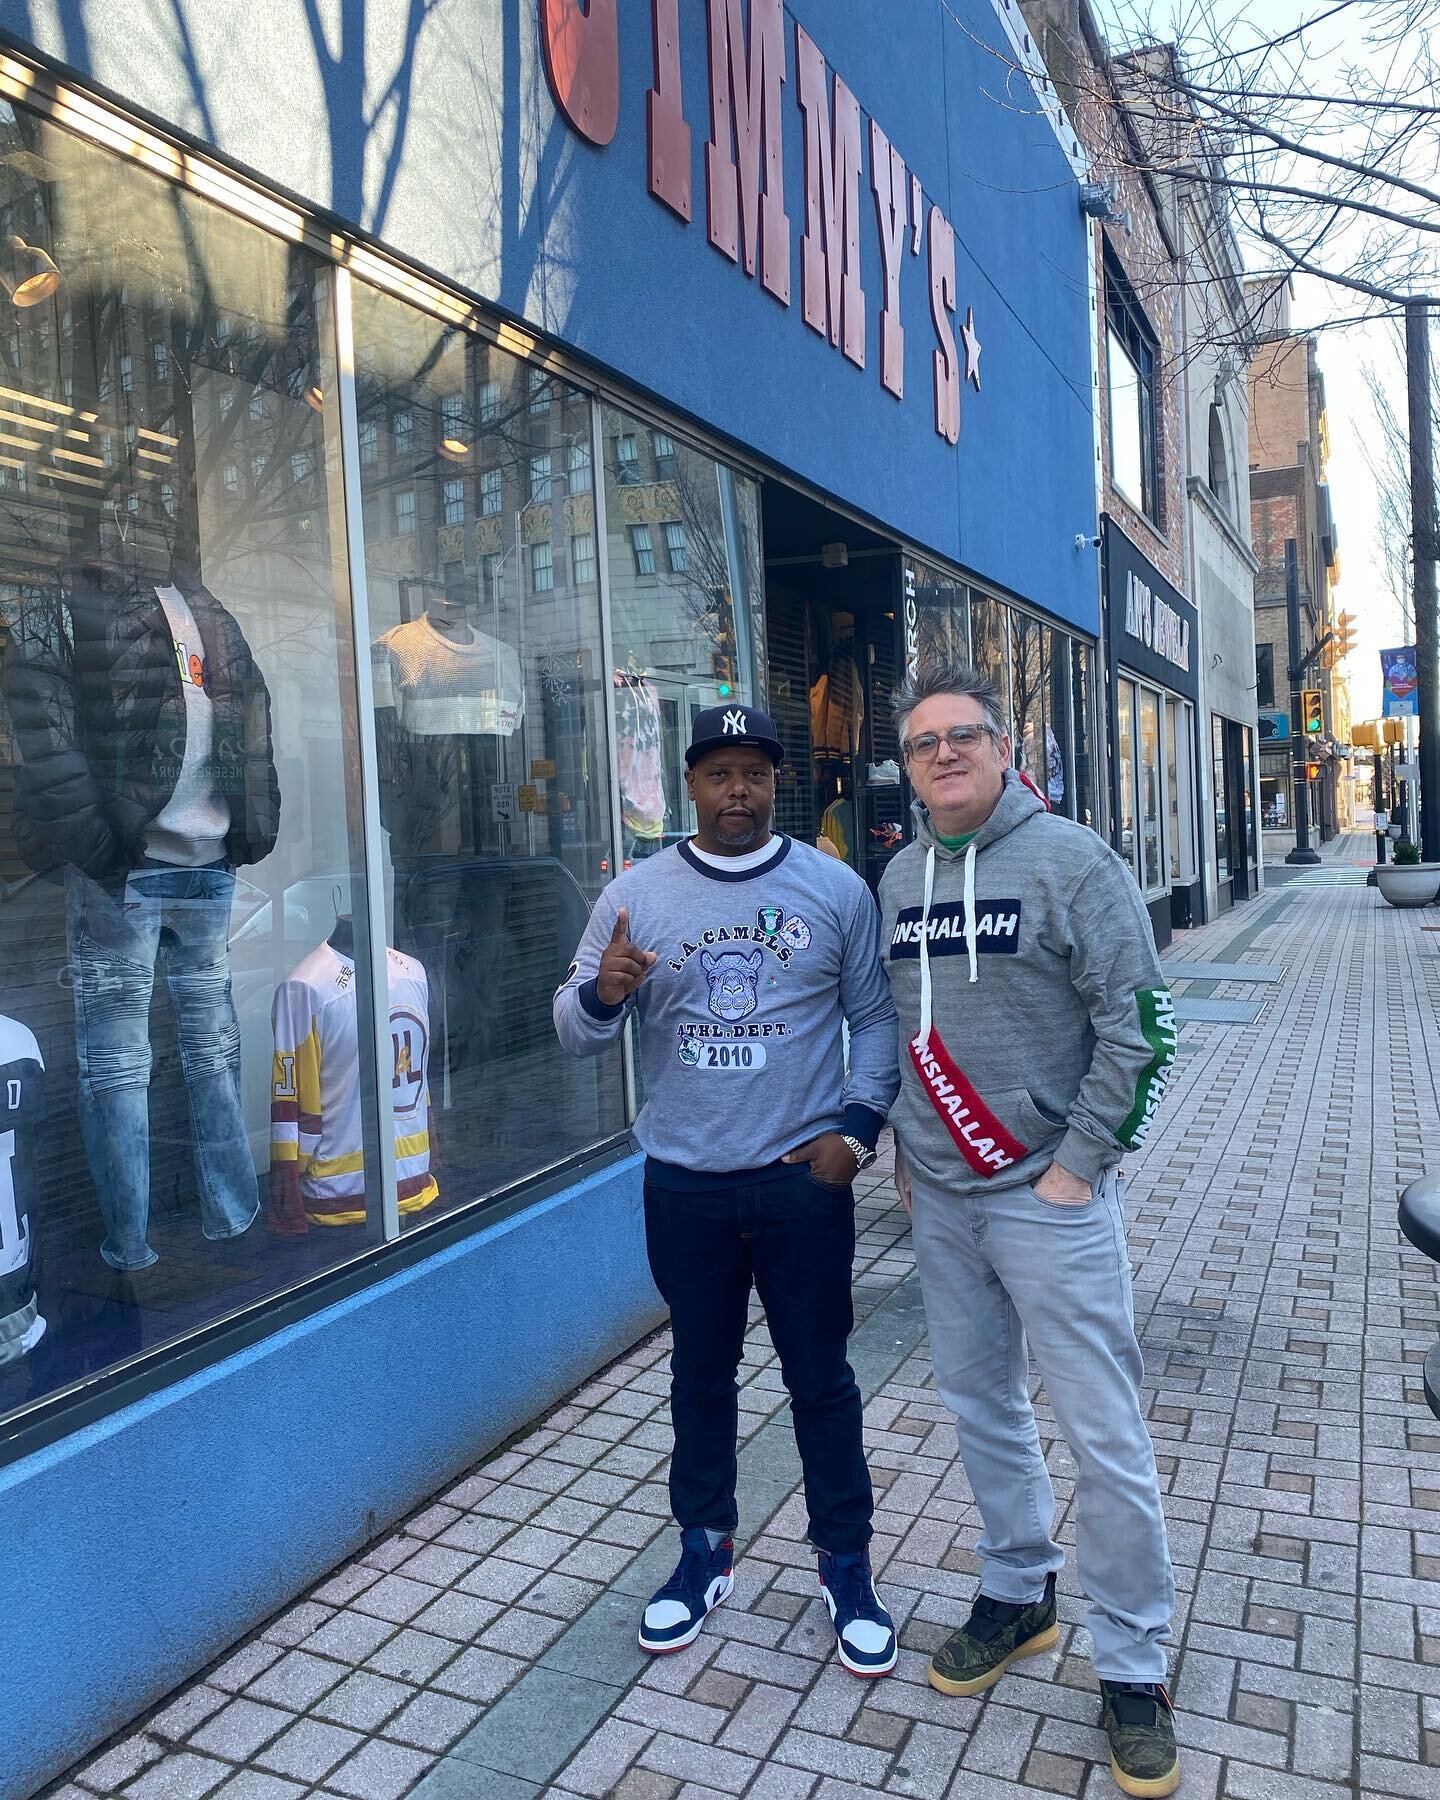 A friend, a great designer, a good human and a great brand. The man behind @inshallahclothing XL with Jimmy&rsquo;s vet Dave in his new classic hoody. #203 #bpt #since1920 #bridgeport #streetwear #smallbusiness #sting #thepolice not pictured here....